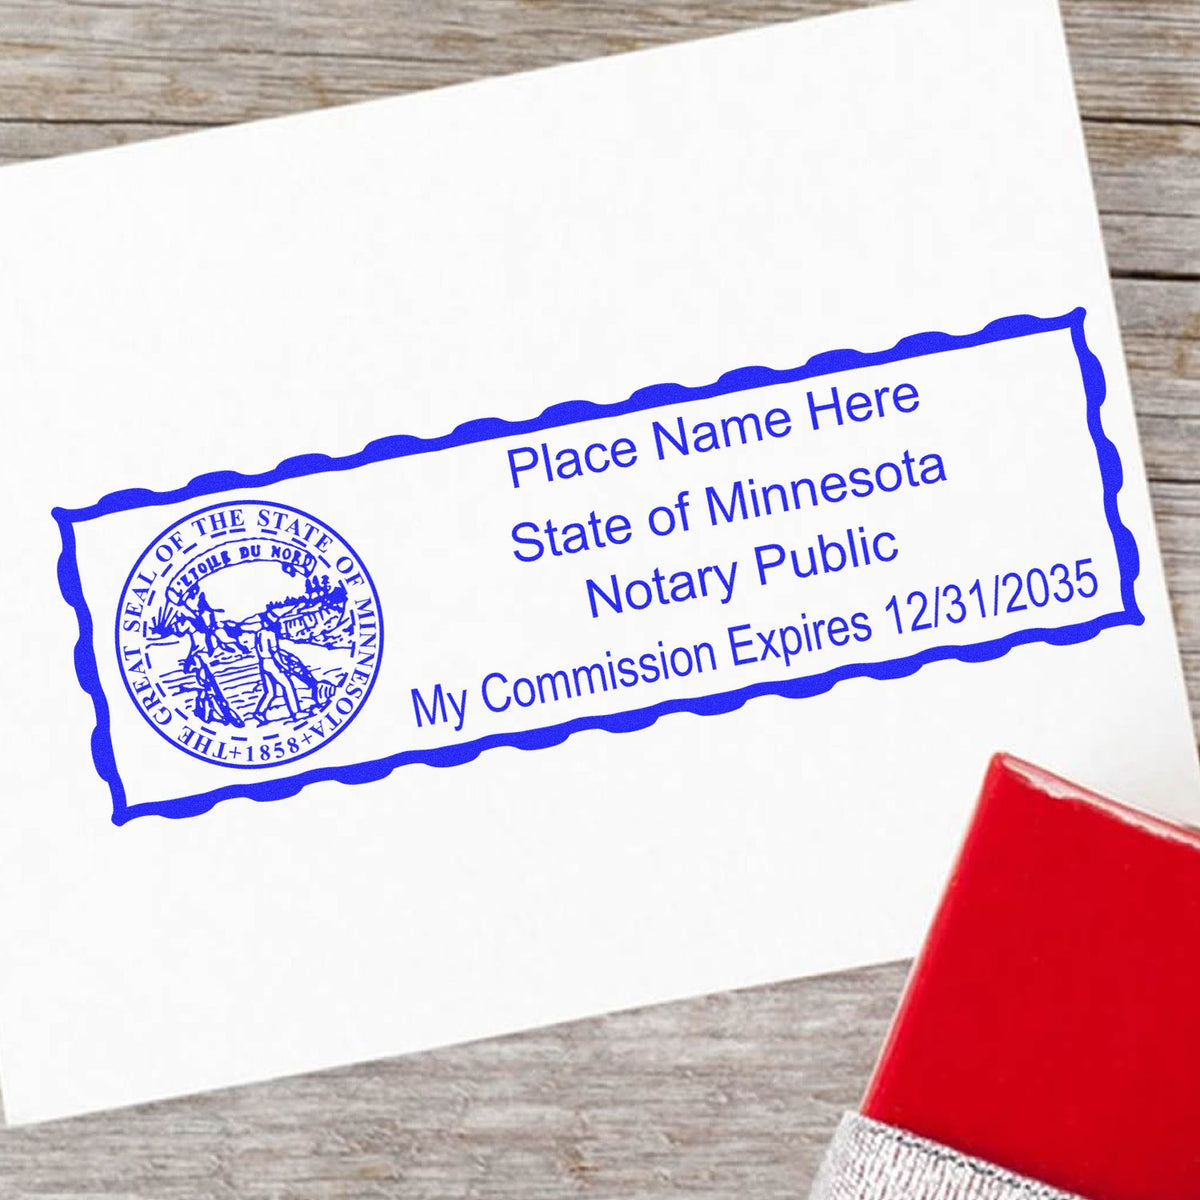 A lifestyle photo showing a stamped image of the Wooden Handle Minnesota State Seal Notary Public Stamp on a piece of paper